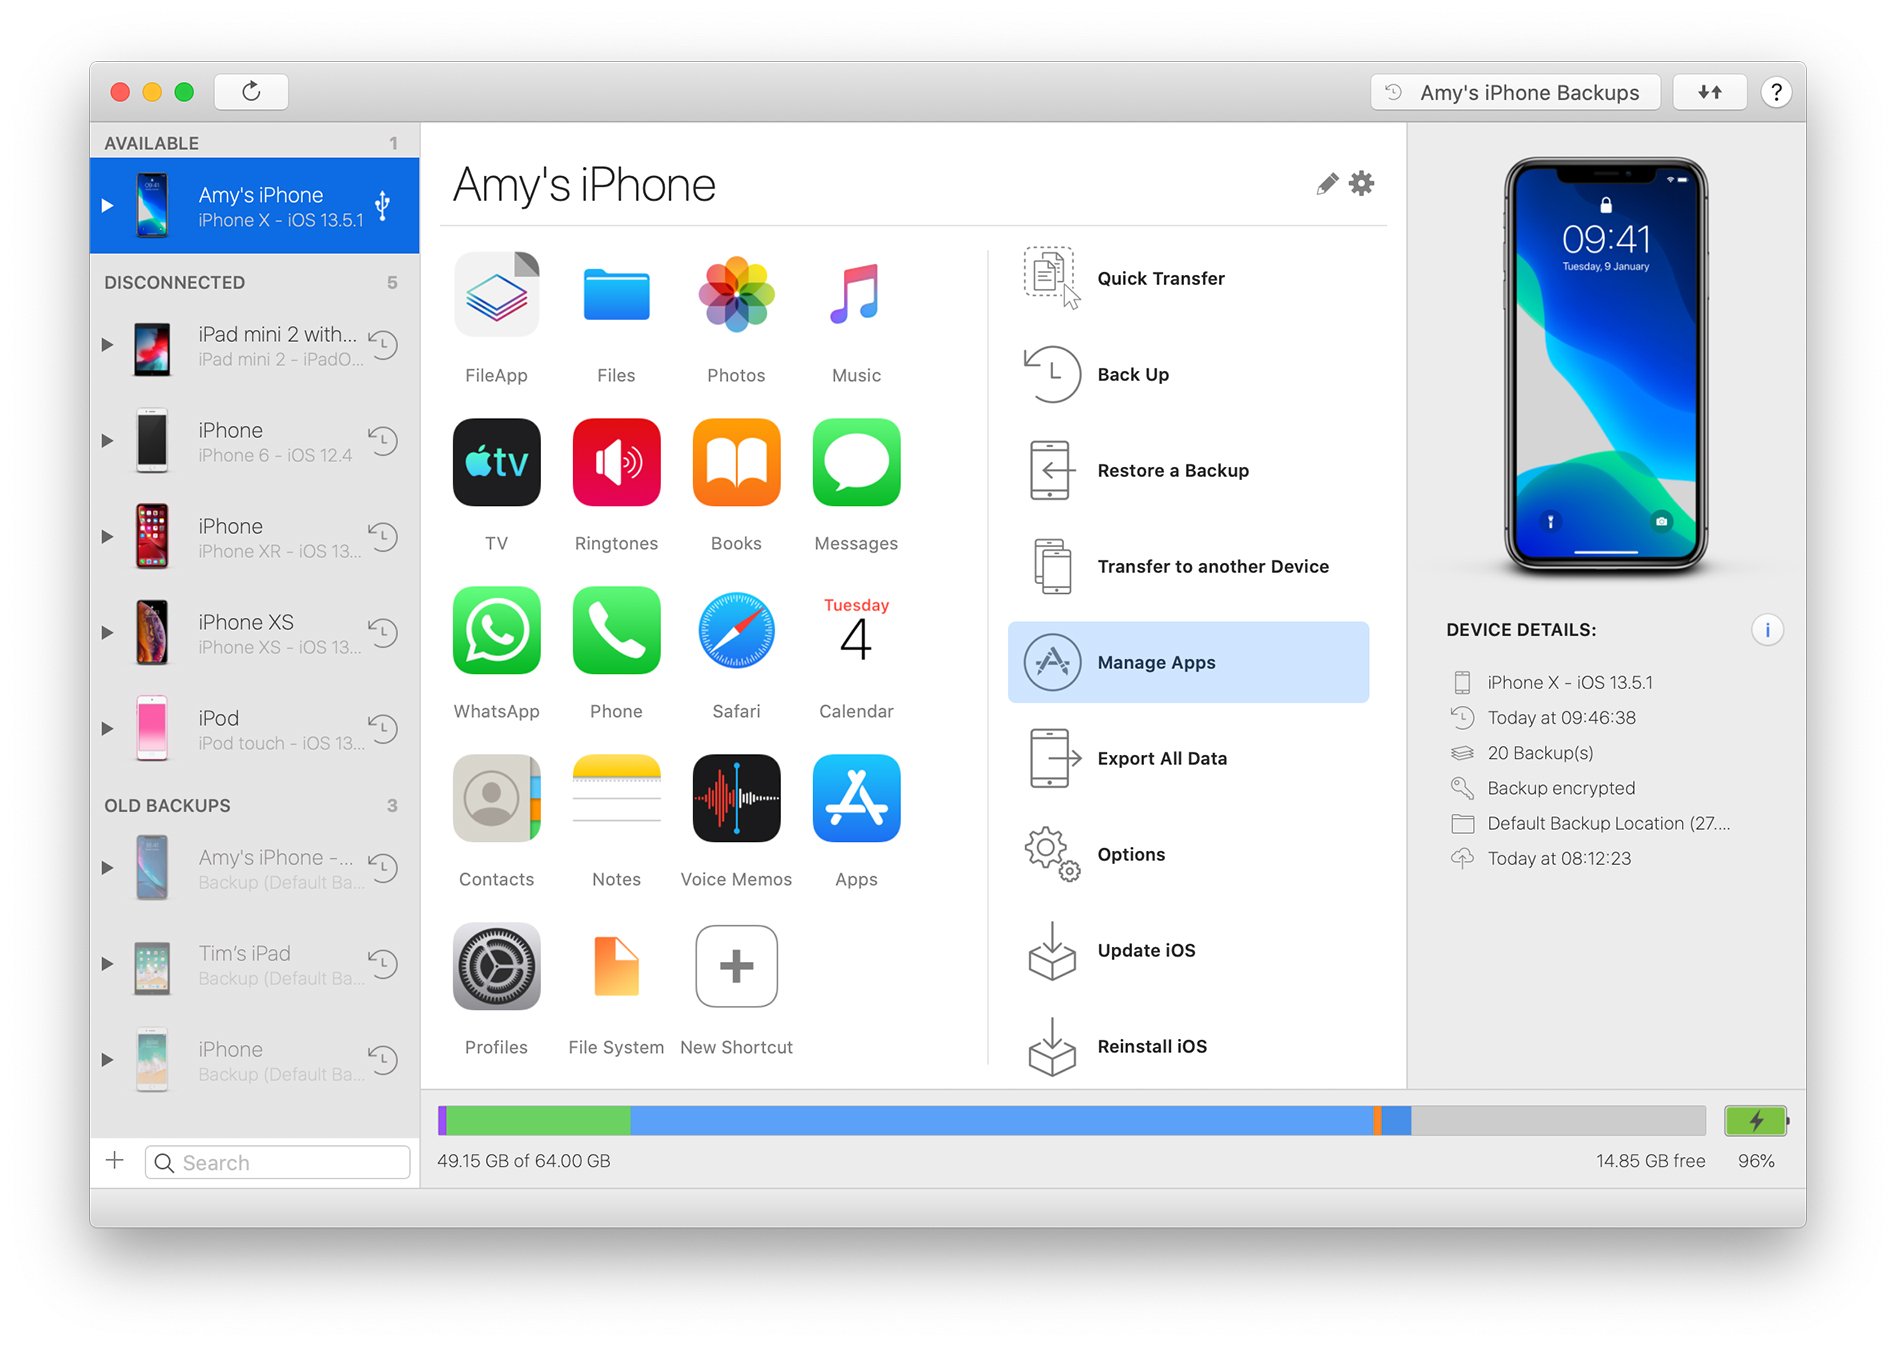 iMazing Main Screen, Manage Apps Highlighted